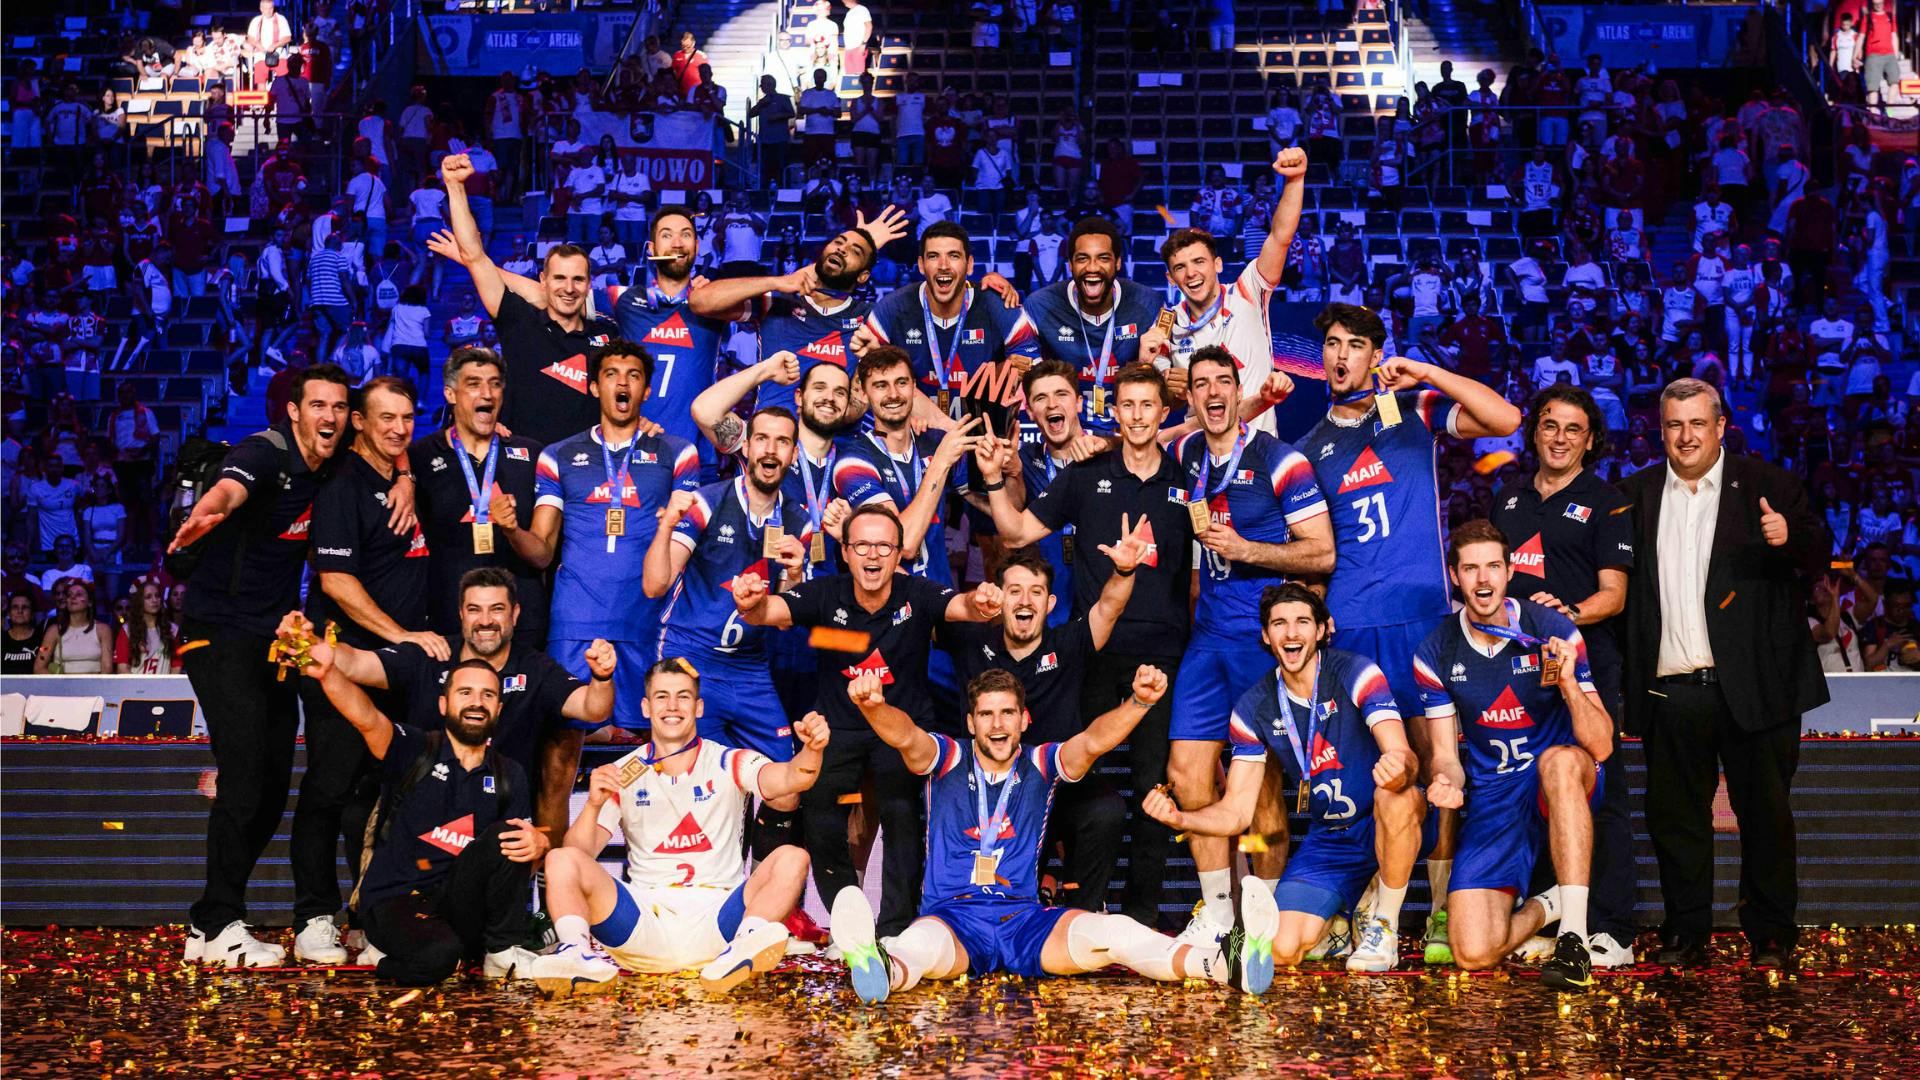 Antoine Brizard leads France to second VNL crown after shutting down Japan